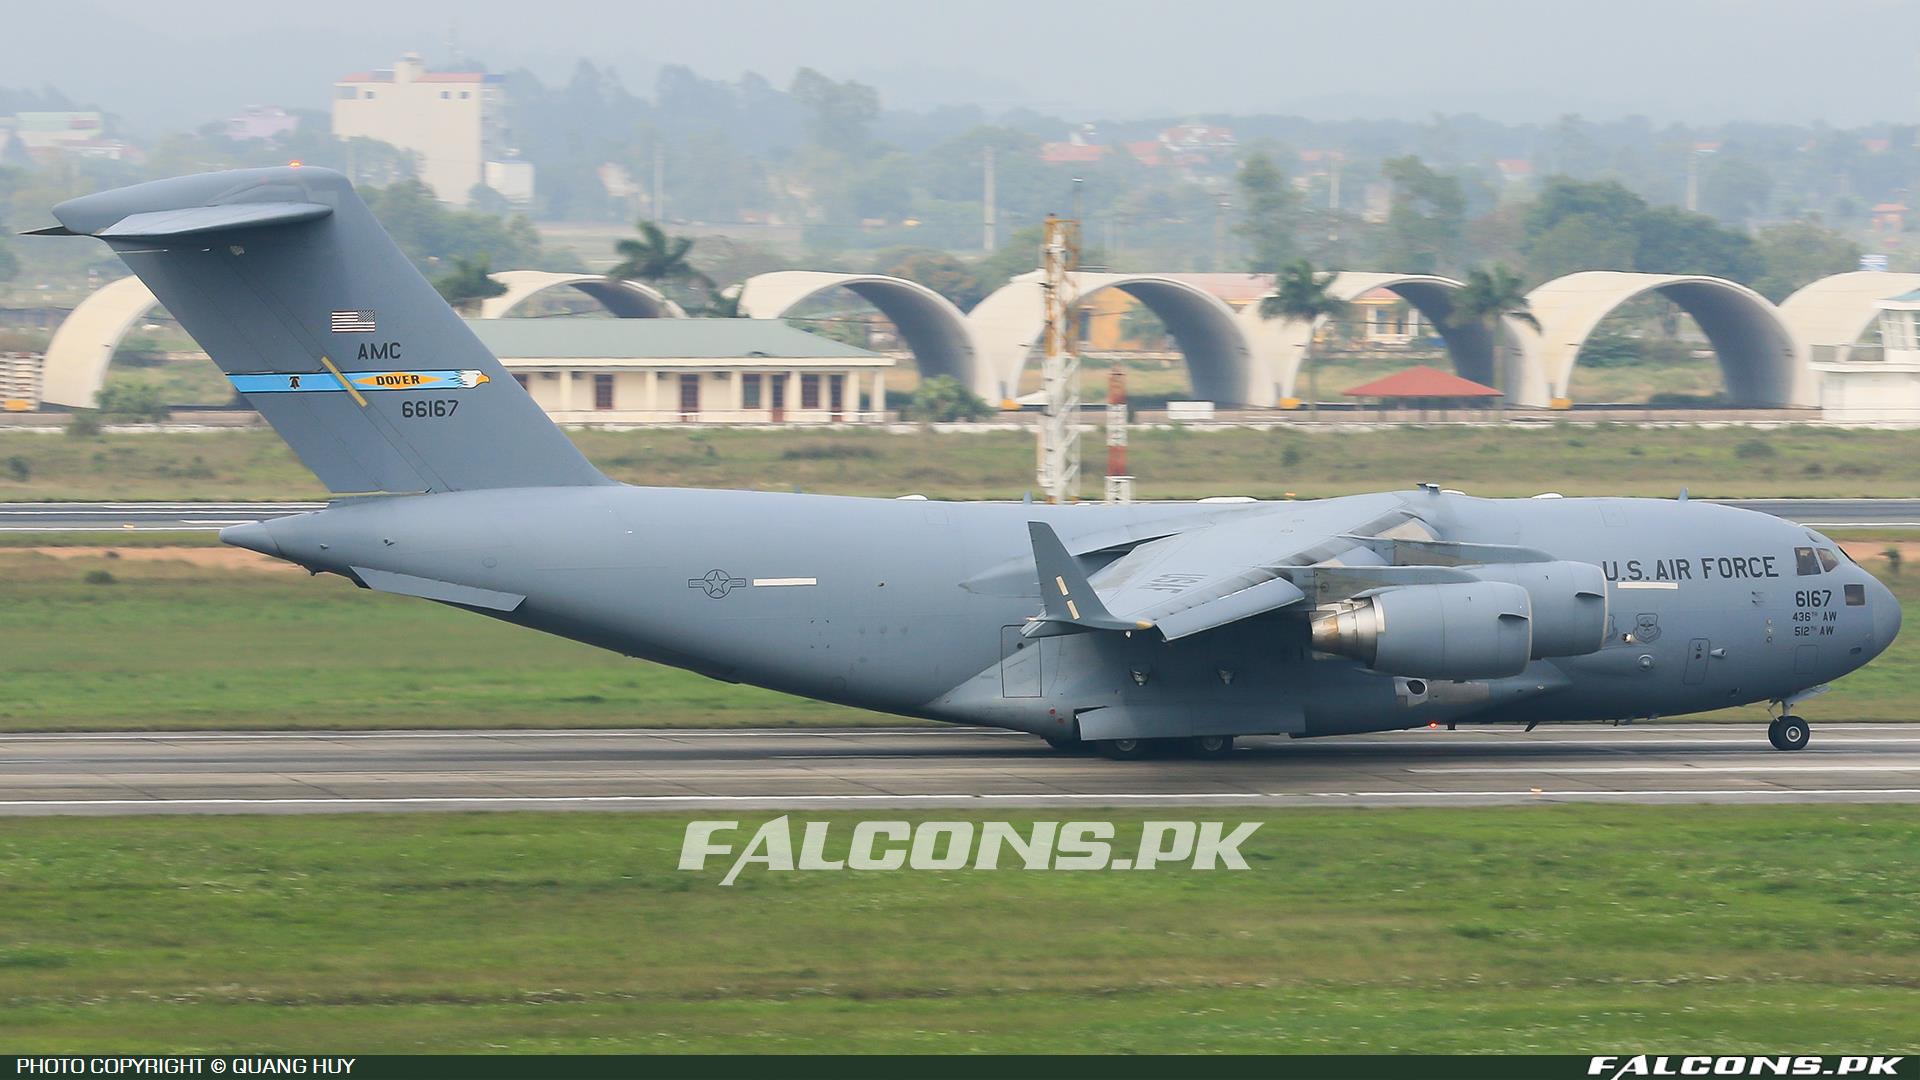 United States Air Force (USAF) Boeing C-17A Globemaster III, Reg: 06-6167 (Photo by Quang Huy)